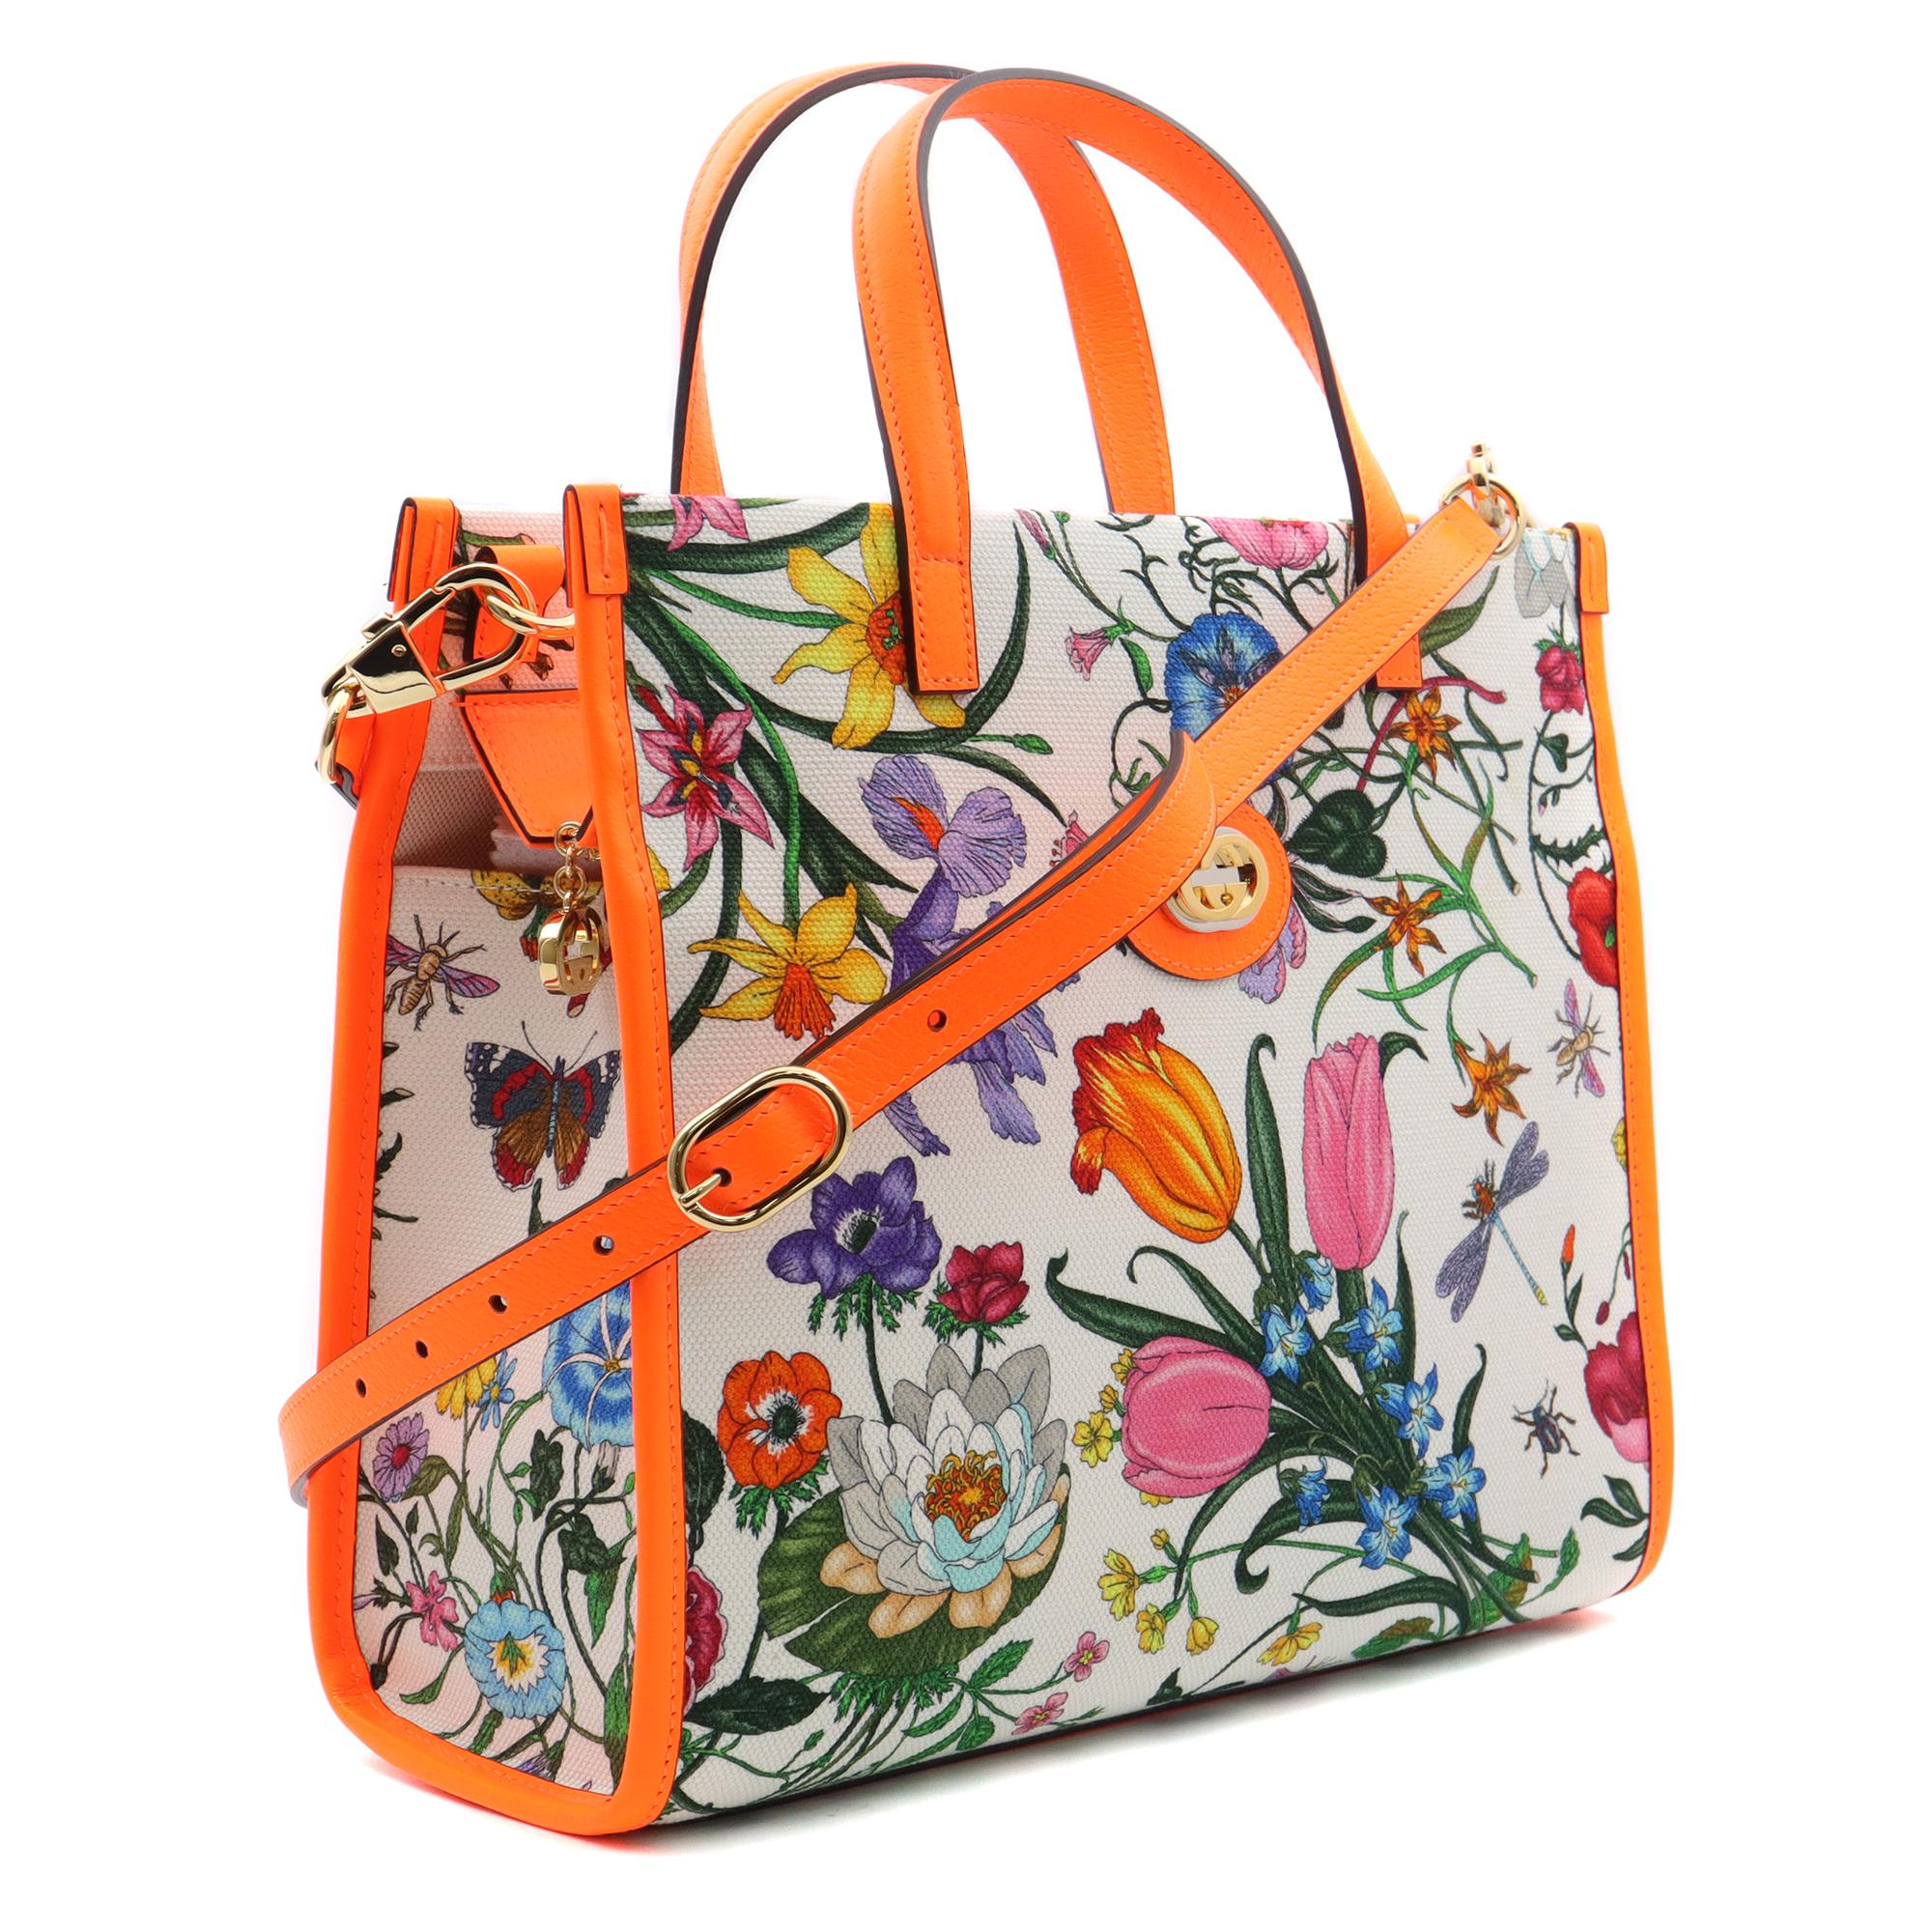 Presented on a tote bag in canvas, the historic Floral motif continues to influence the House. Originally depicted by Italian artist Vittorio Accornero, the design has undergone several reinventions and is brought to the forefront in the Cruise 2019